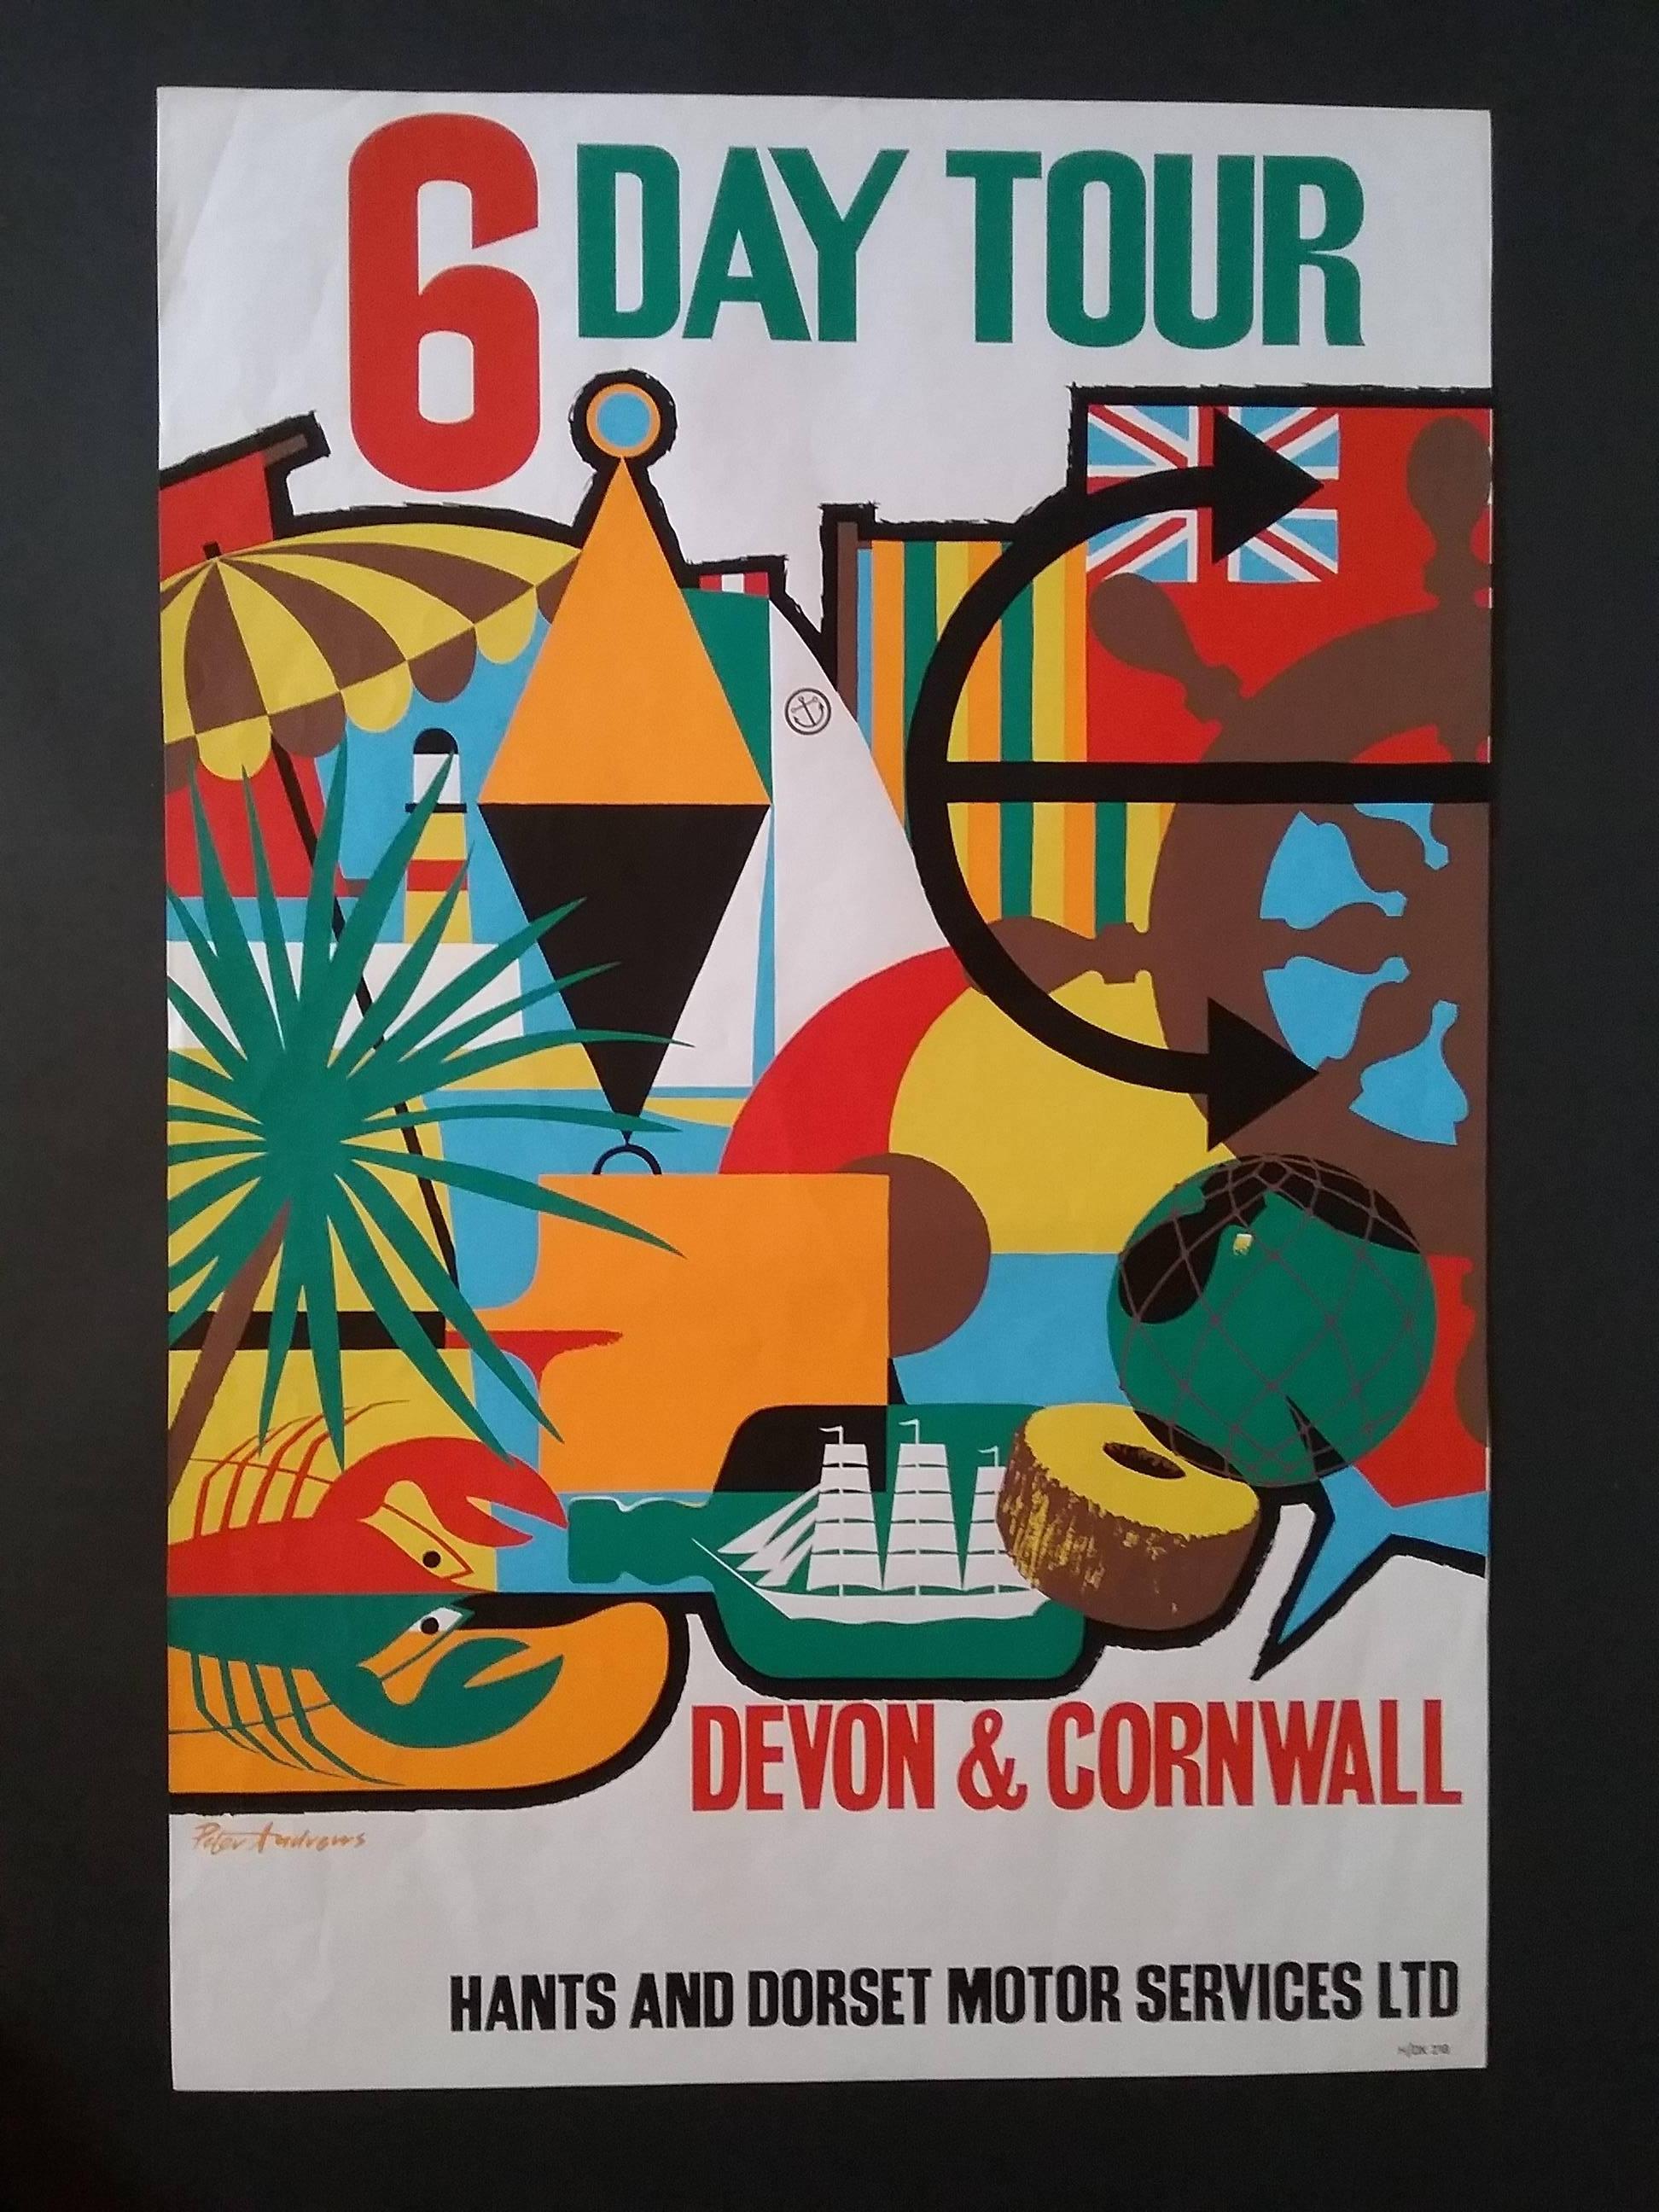 6 Day Tour, Devon and Cornwall.  Hants and Dorset Motor Services Ltd. - Print by Peter Andrews